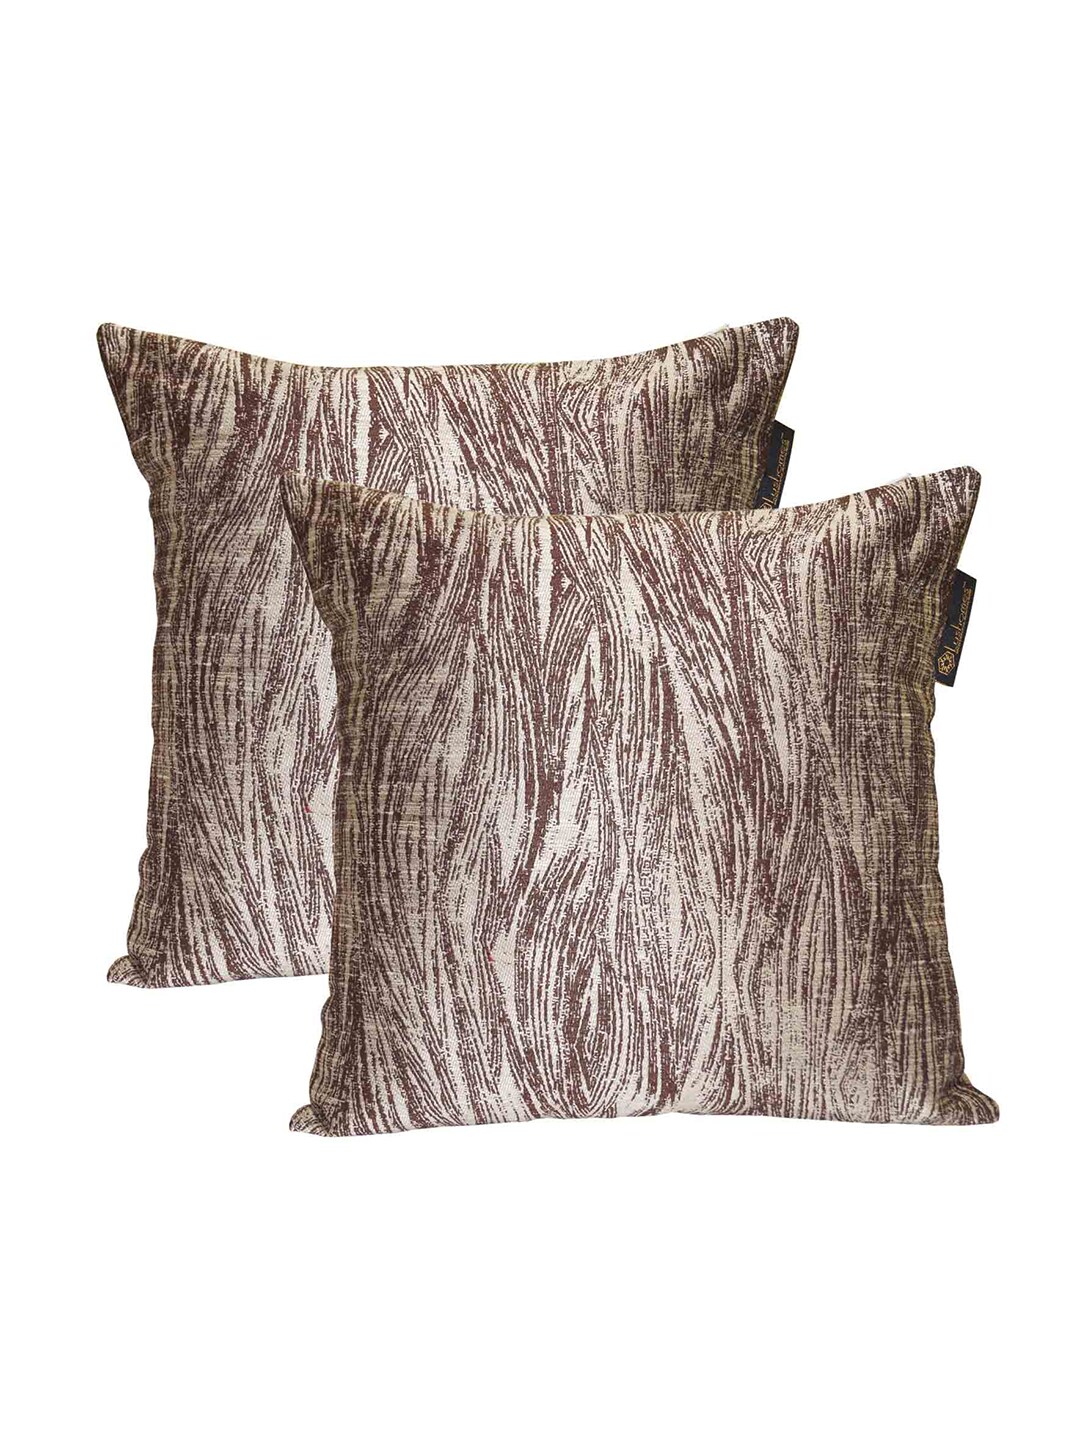 Lushomes Brown & White Set of 2 Abstract Square Cushion Covers Price in India